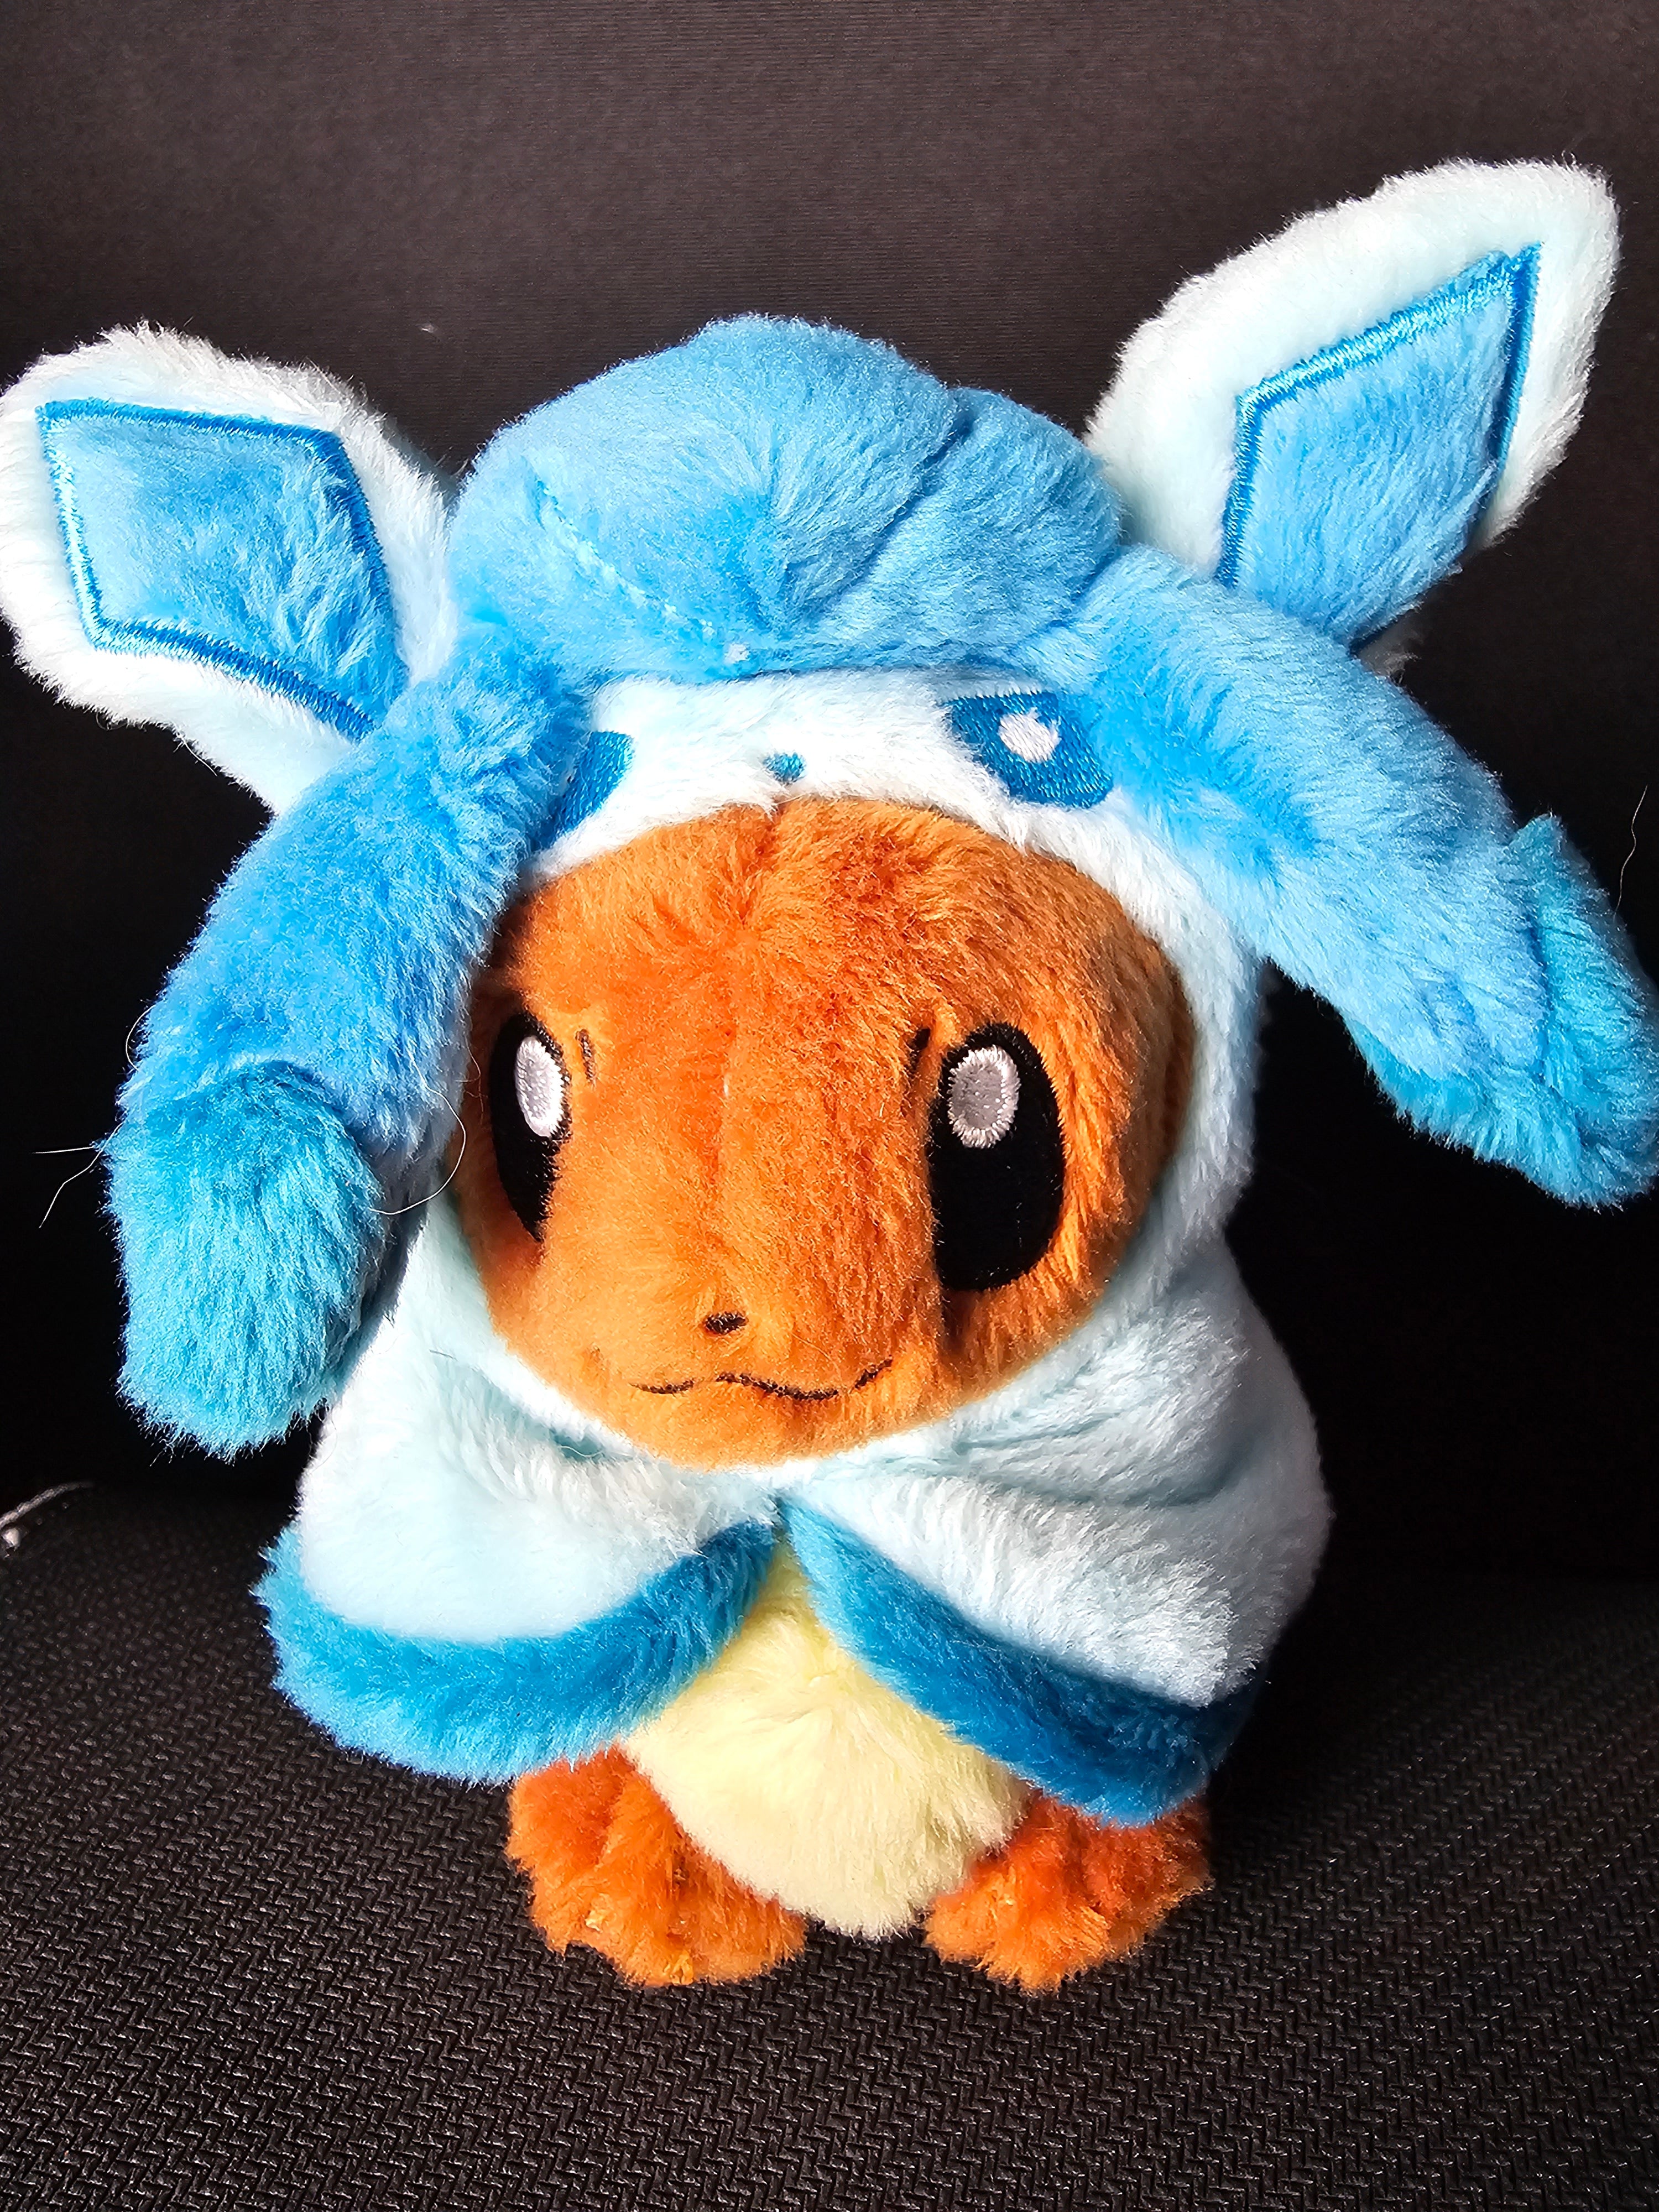 Glaceon Eevee Poncho Keychain Plush Pokemon Center Japan Official Poncho